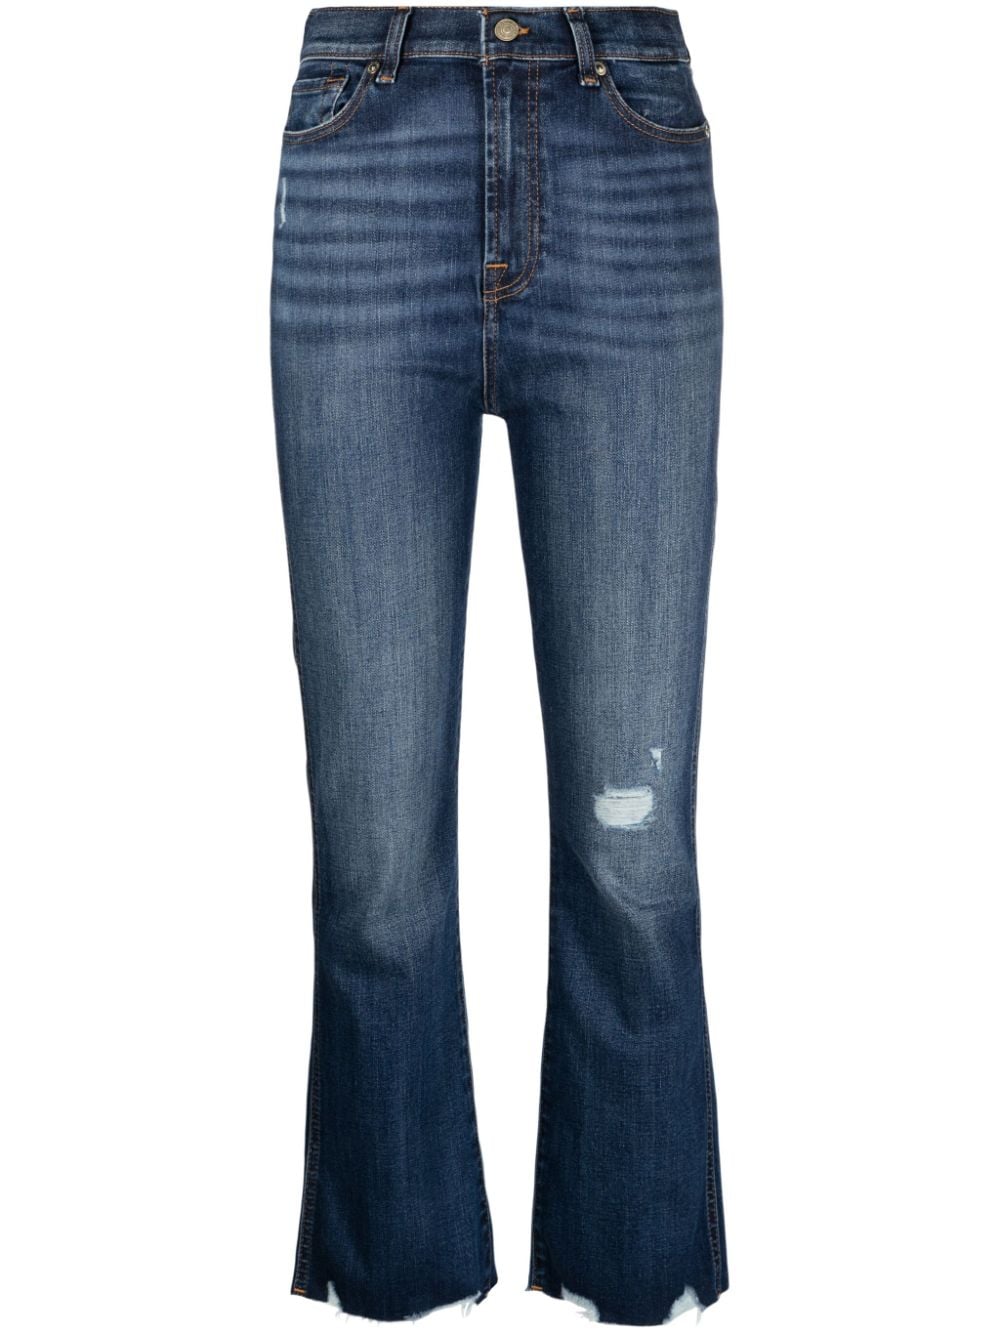 7 For All Mankind kick flare cropped jeans - Blue von 7 For All Mankind